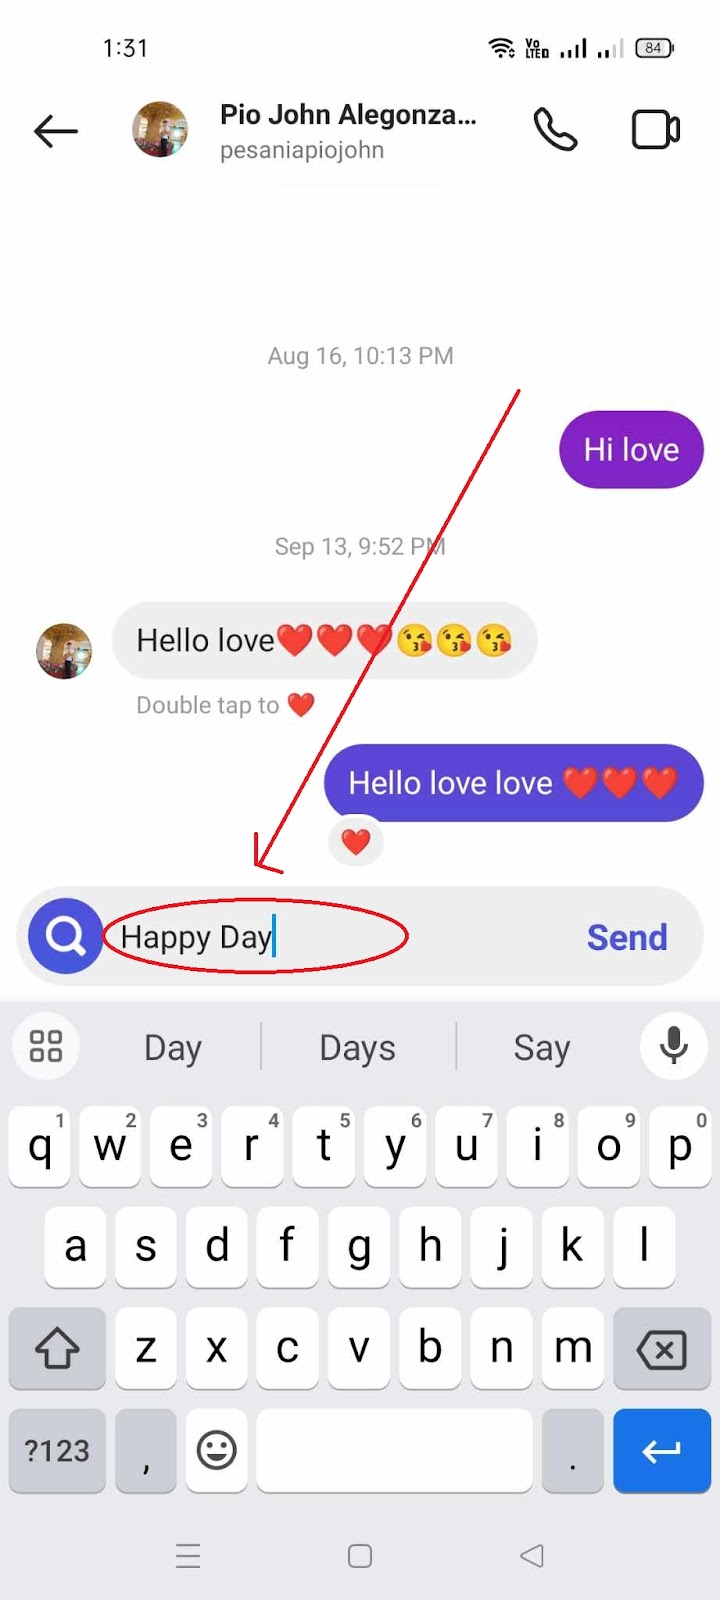 How to Send GIft Messages on Instagram - Type Message